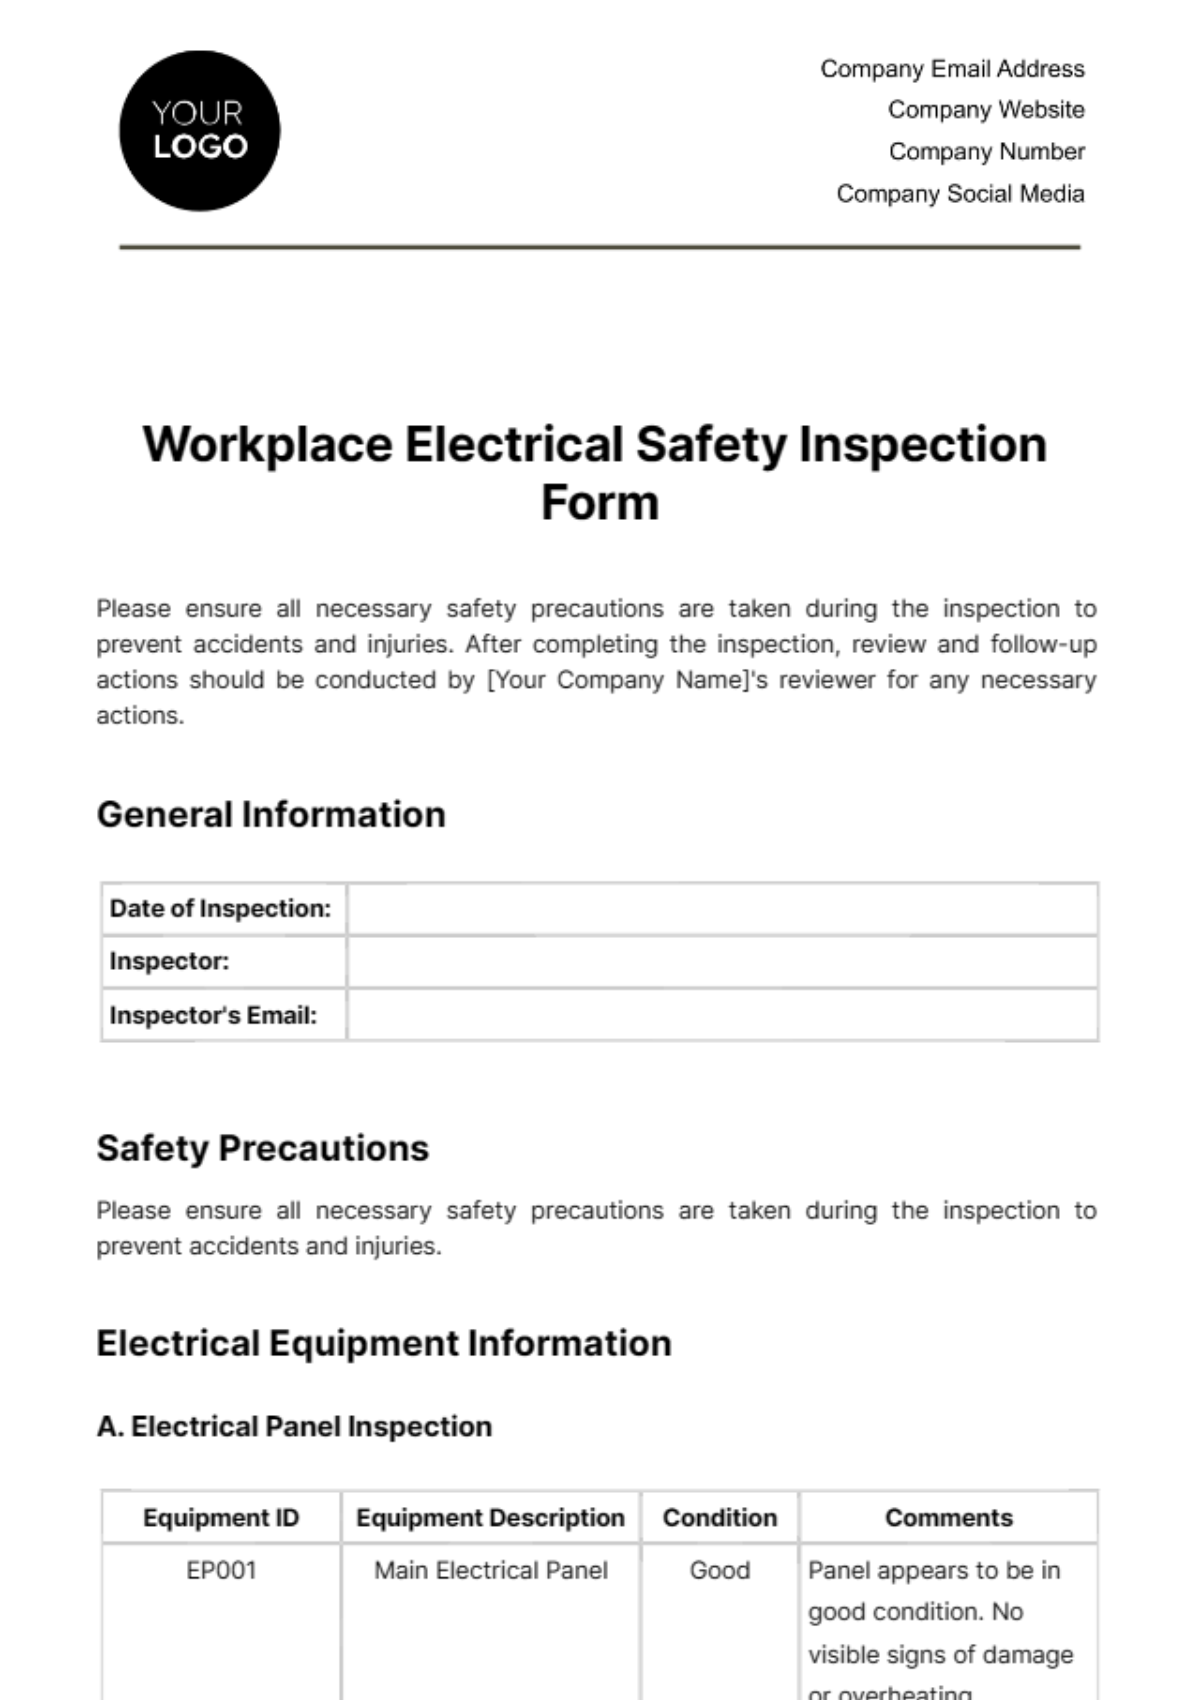 Workplace Electrical Safety Inspection Form Template